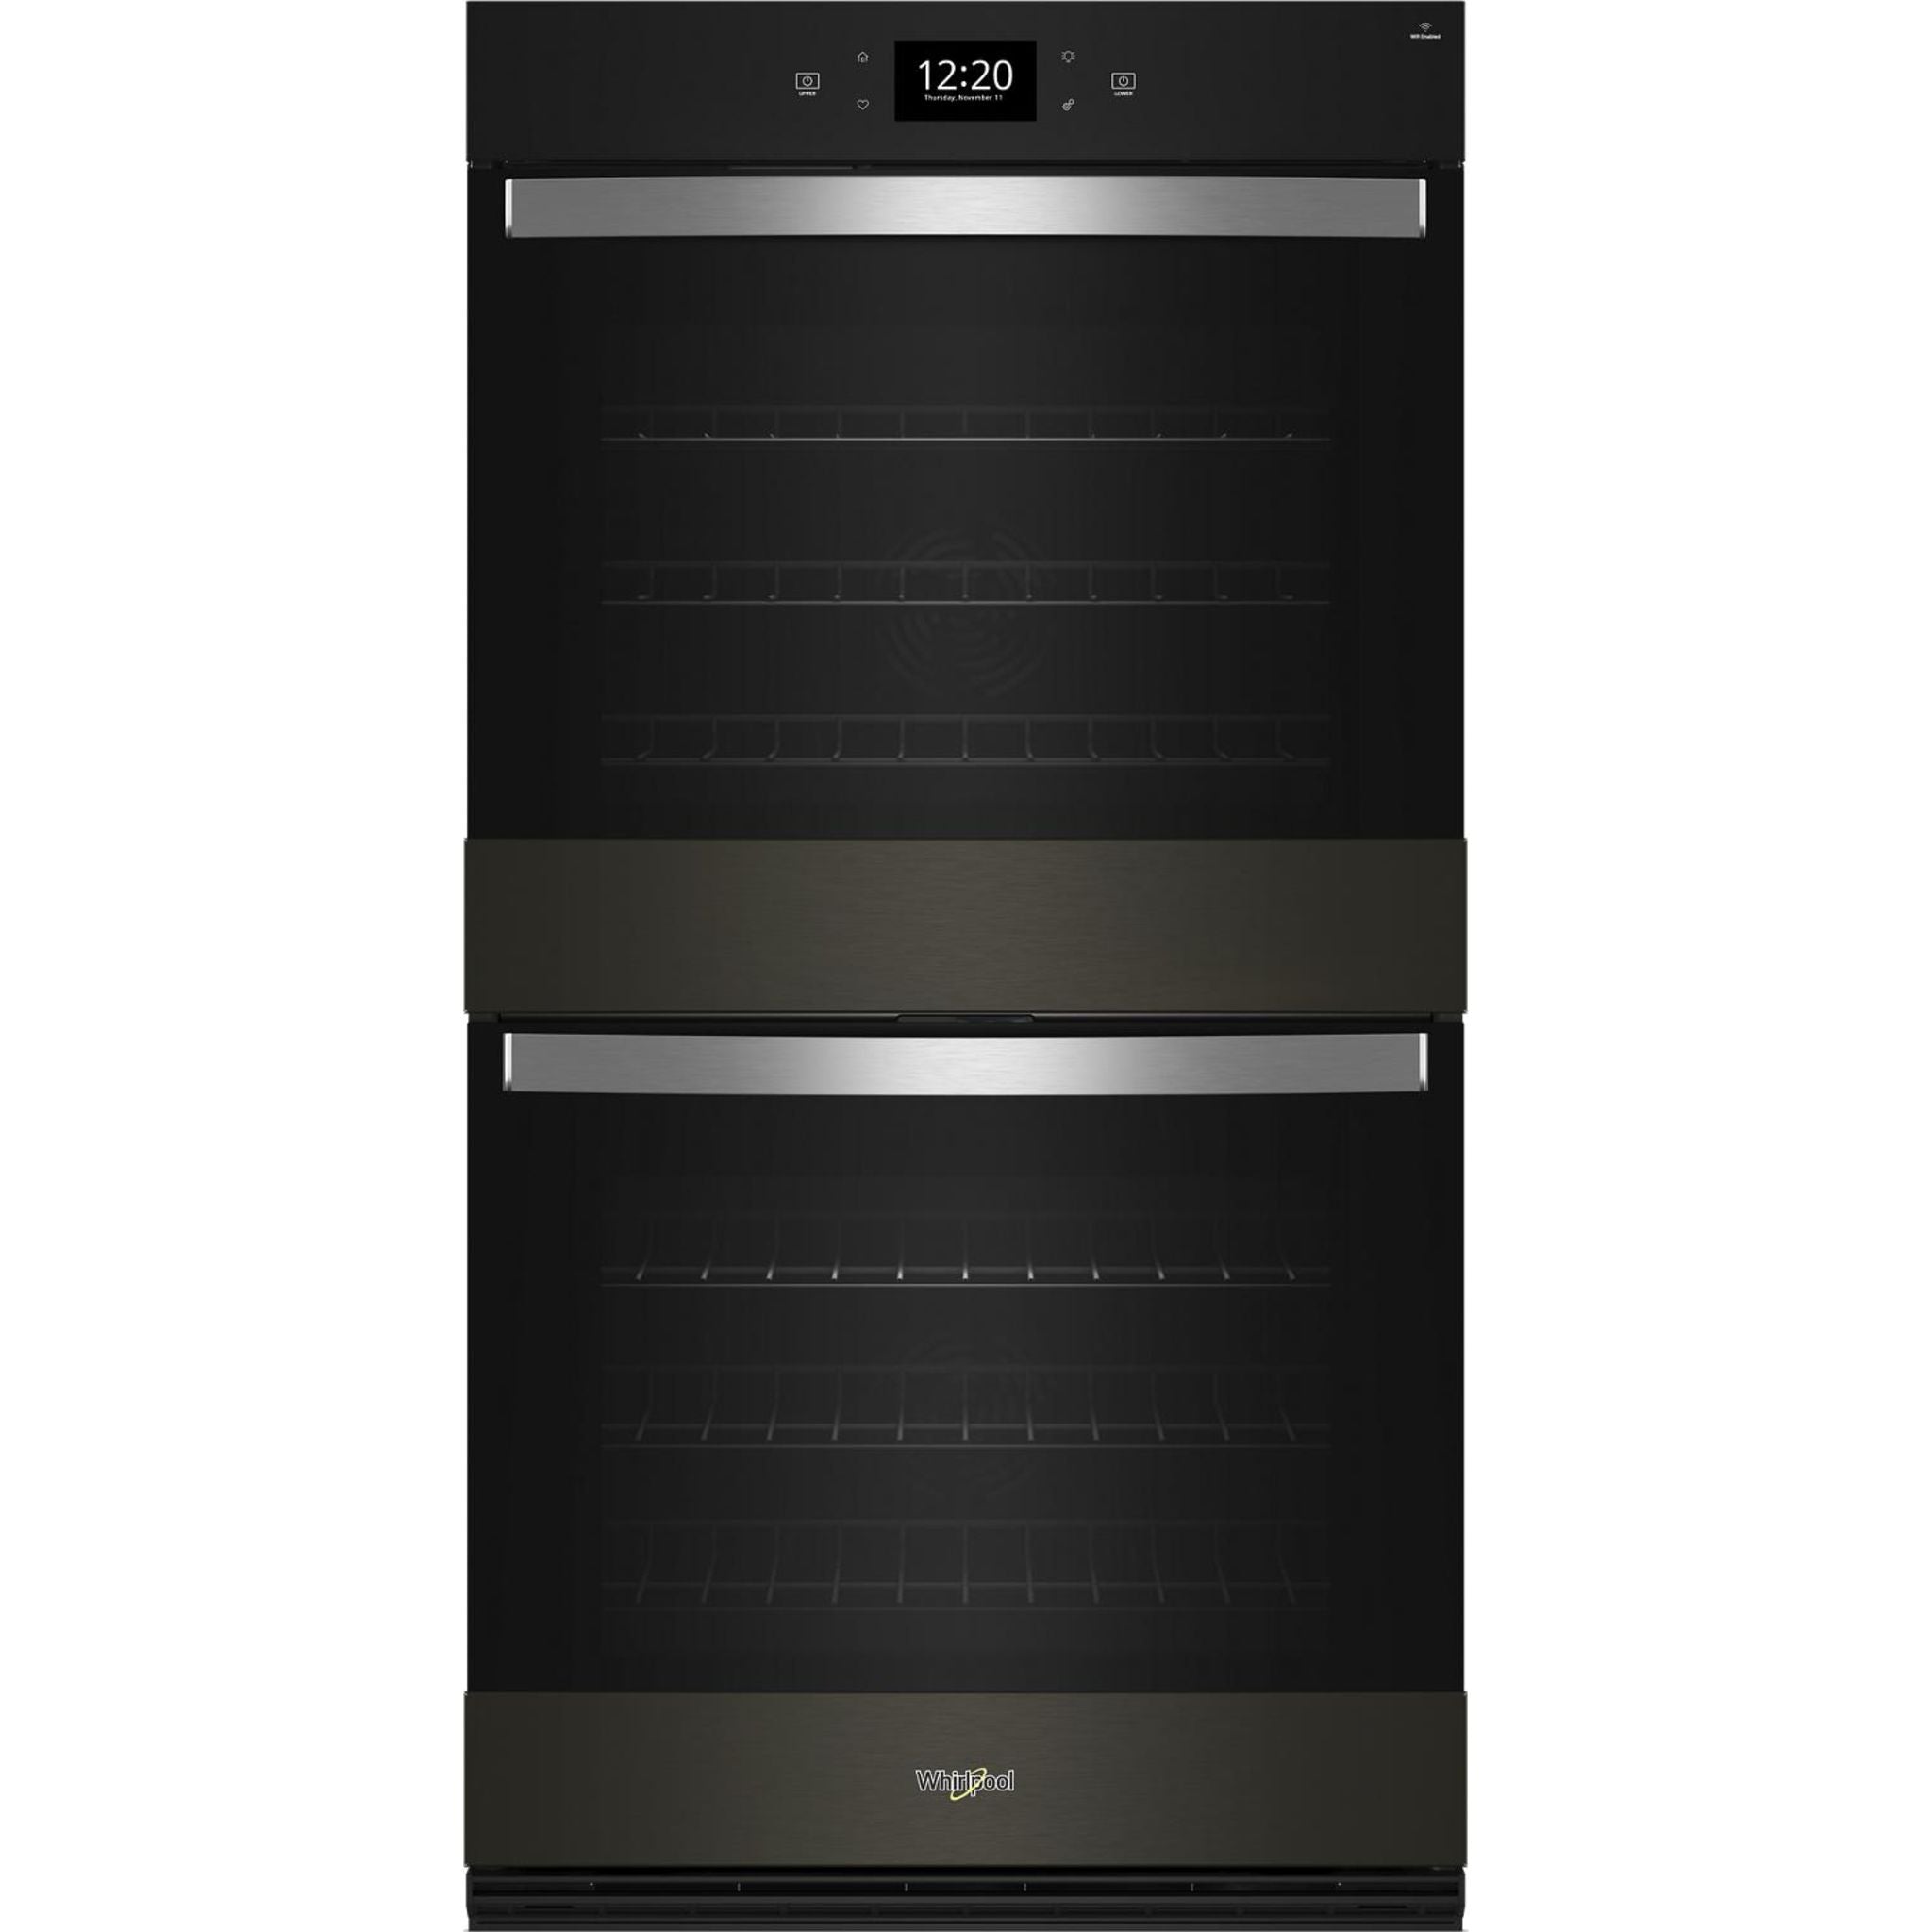 Whirlpool, 30" True Convection Wall Oven (WOED7030PV) - Black Stainless Steel with PrintShield™ Finish